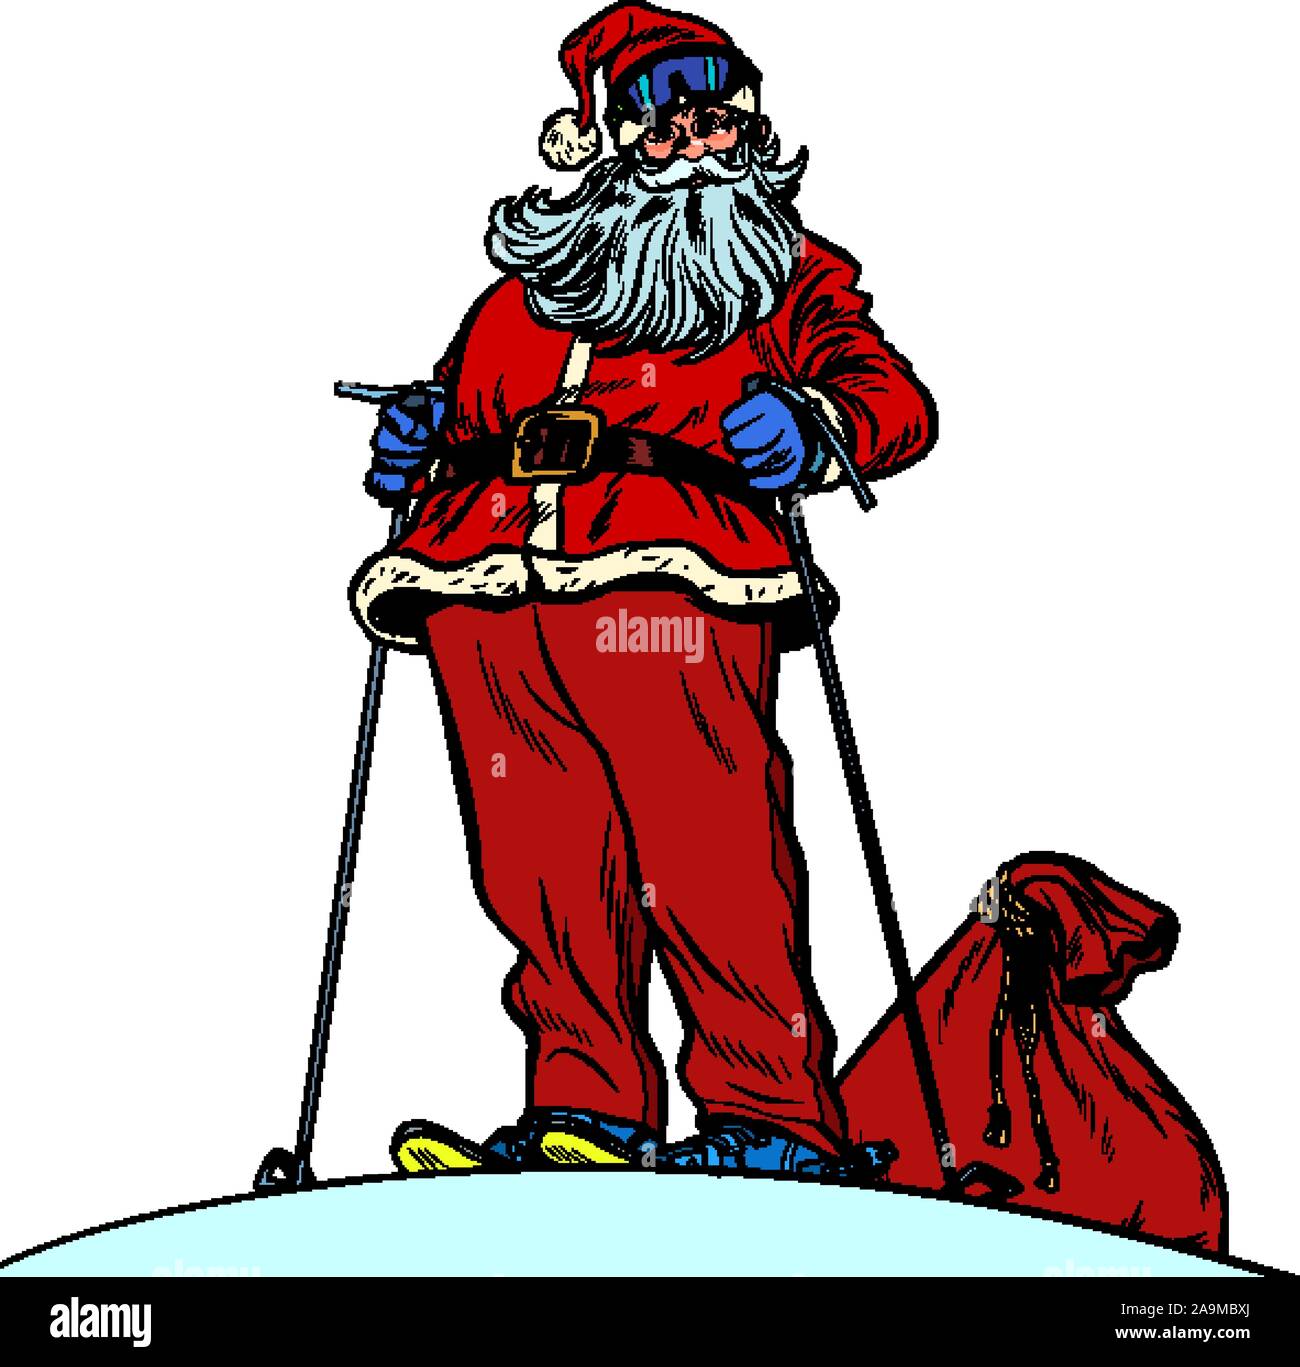 Skier Santa Claus character merry Christmas and happy new year Stock Vector